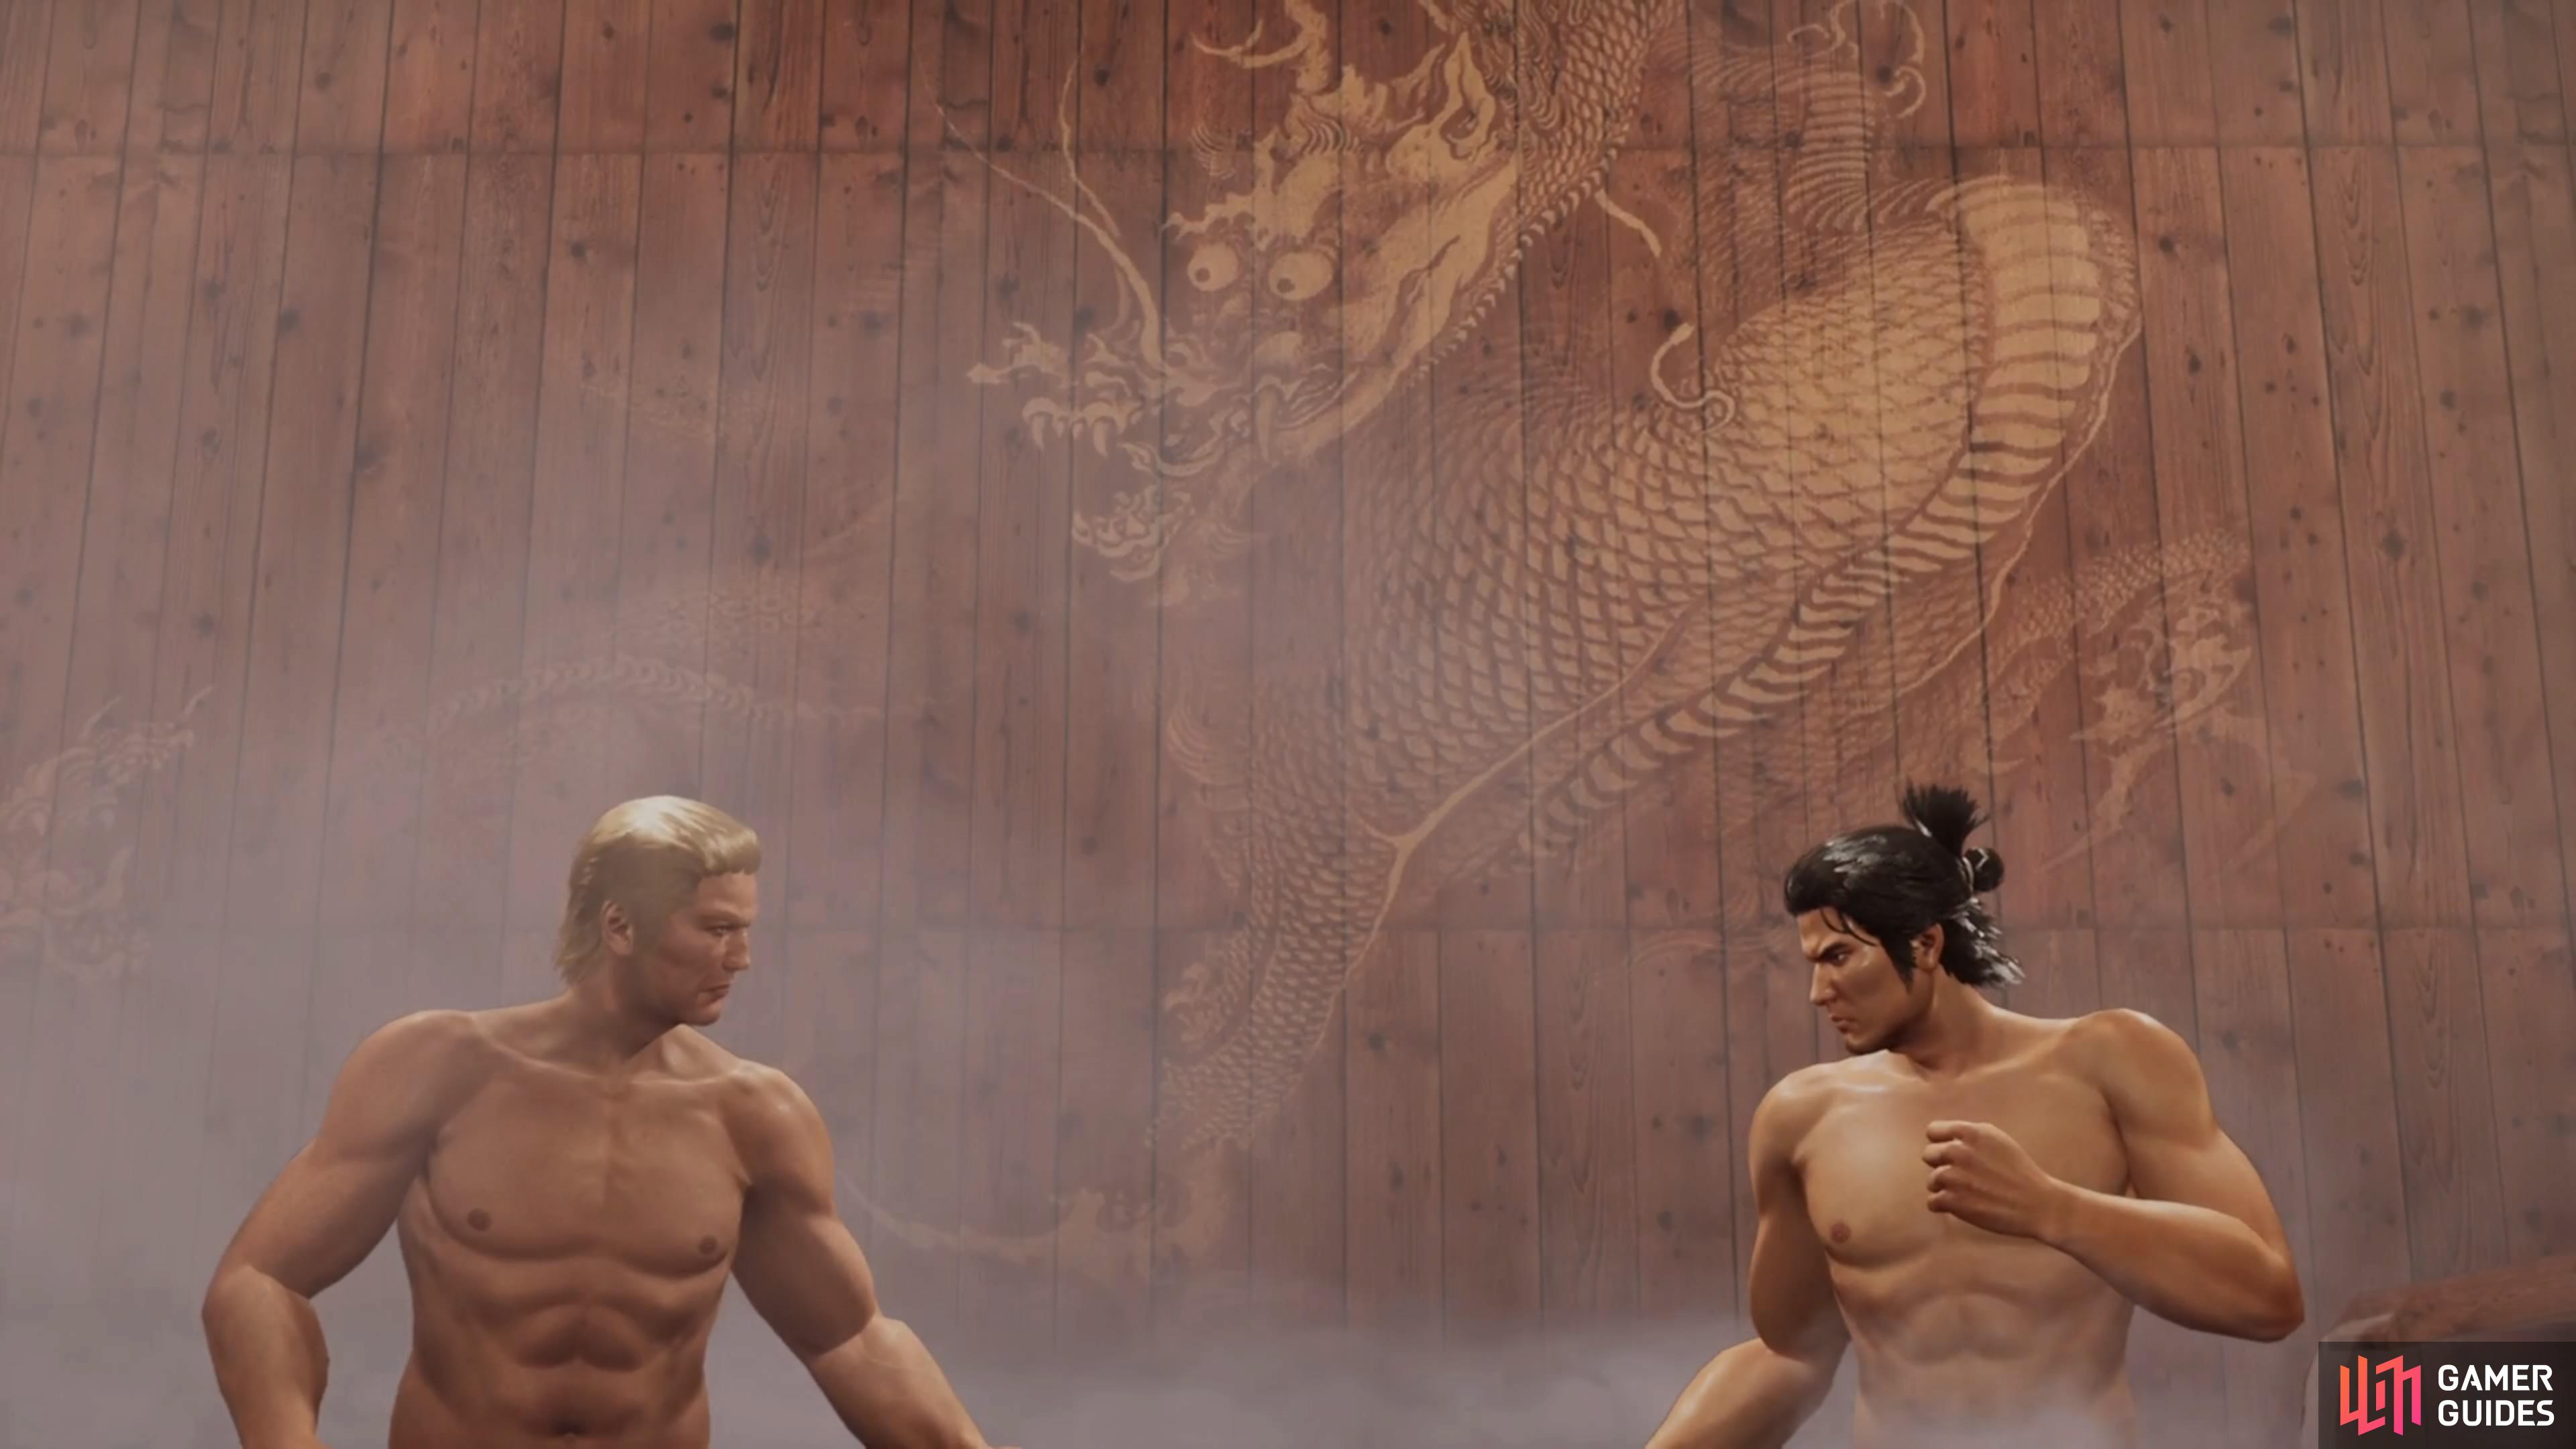 Yep, it's a one-on-one fight, in a bathhouse